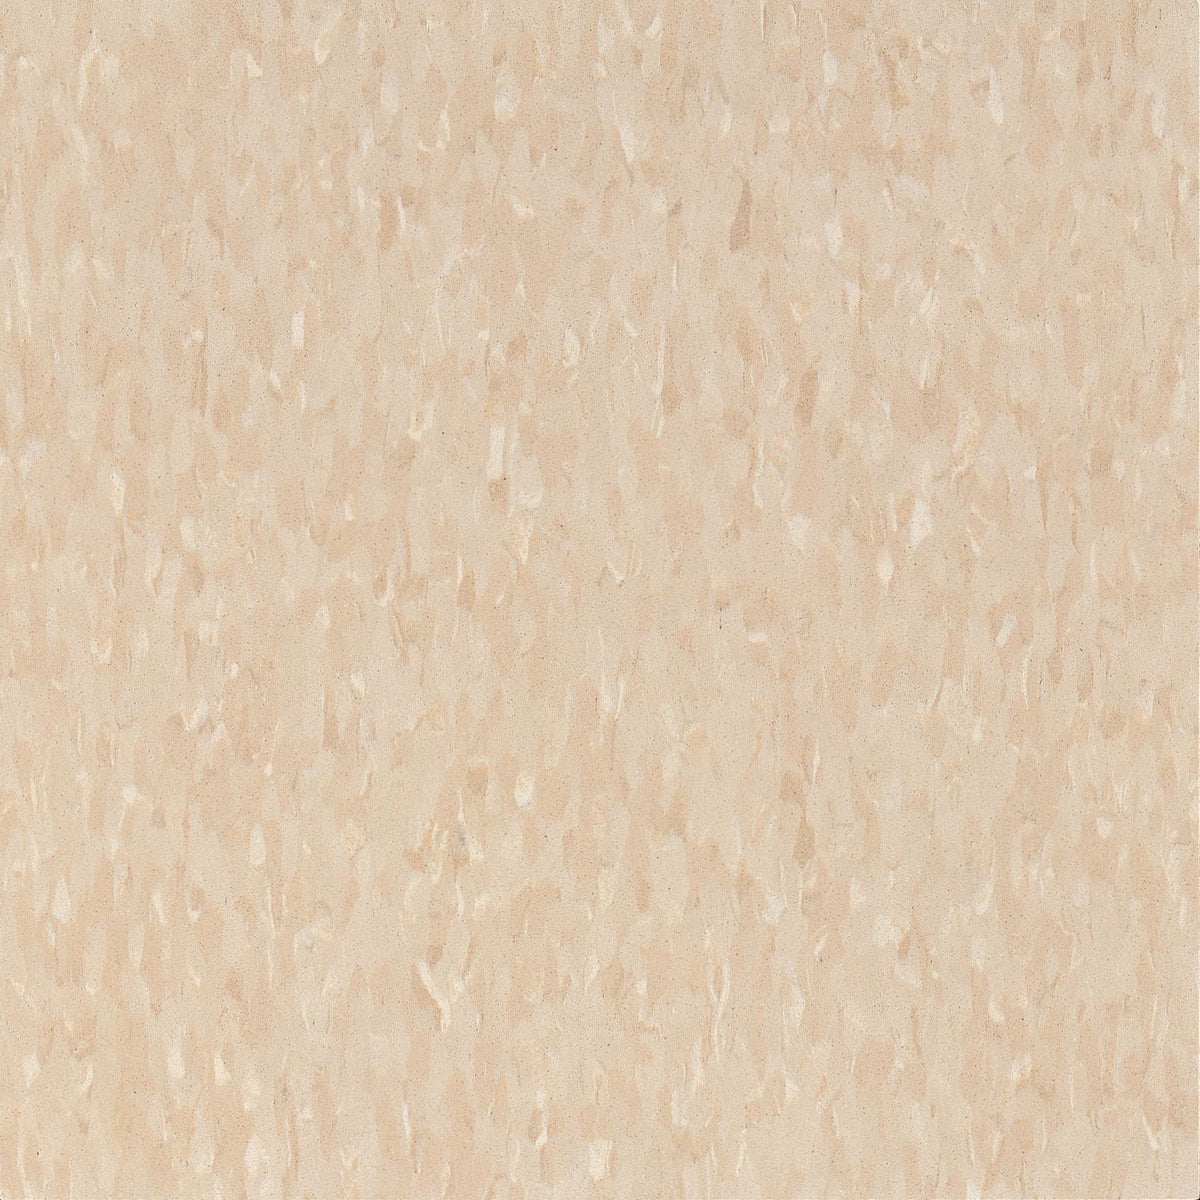 Armstrong Commercial - Standard Excelon Imperial Texture - Vinyl Composition Tile (VCT) - Brushed Sand